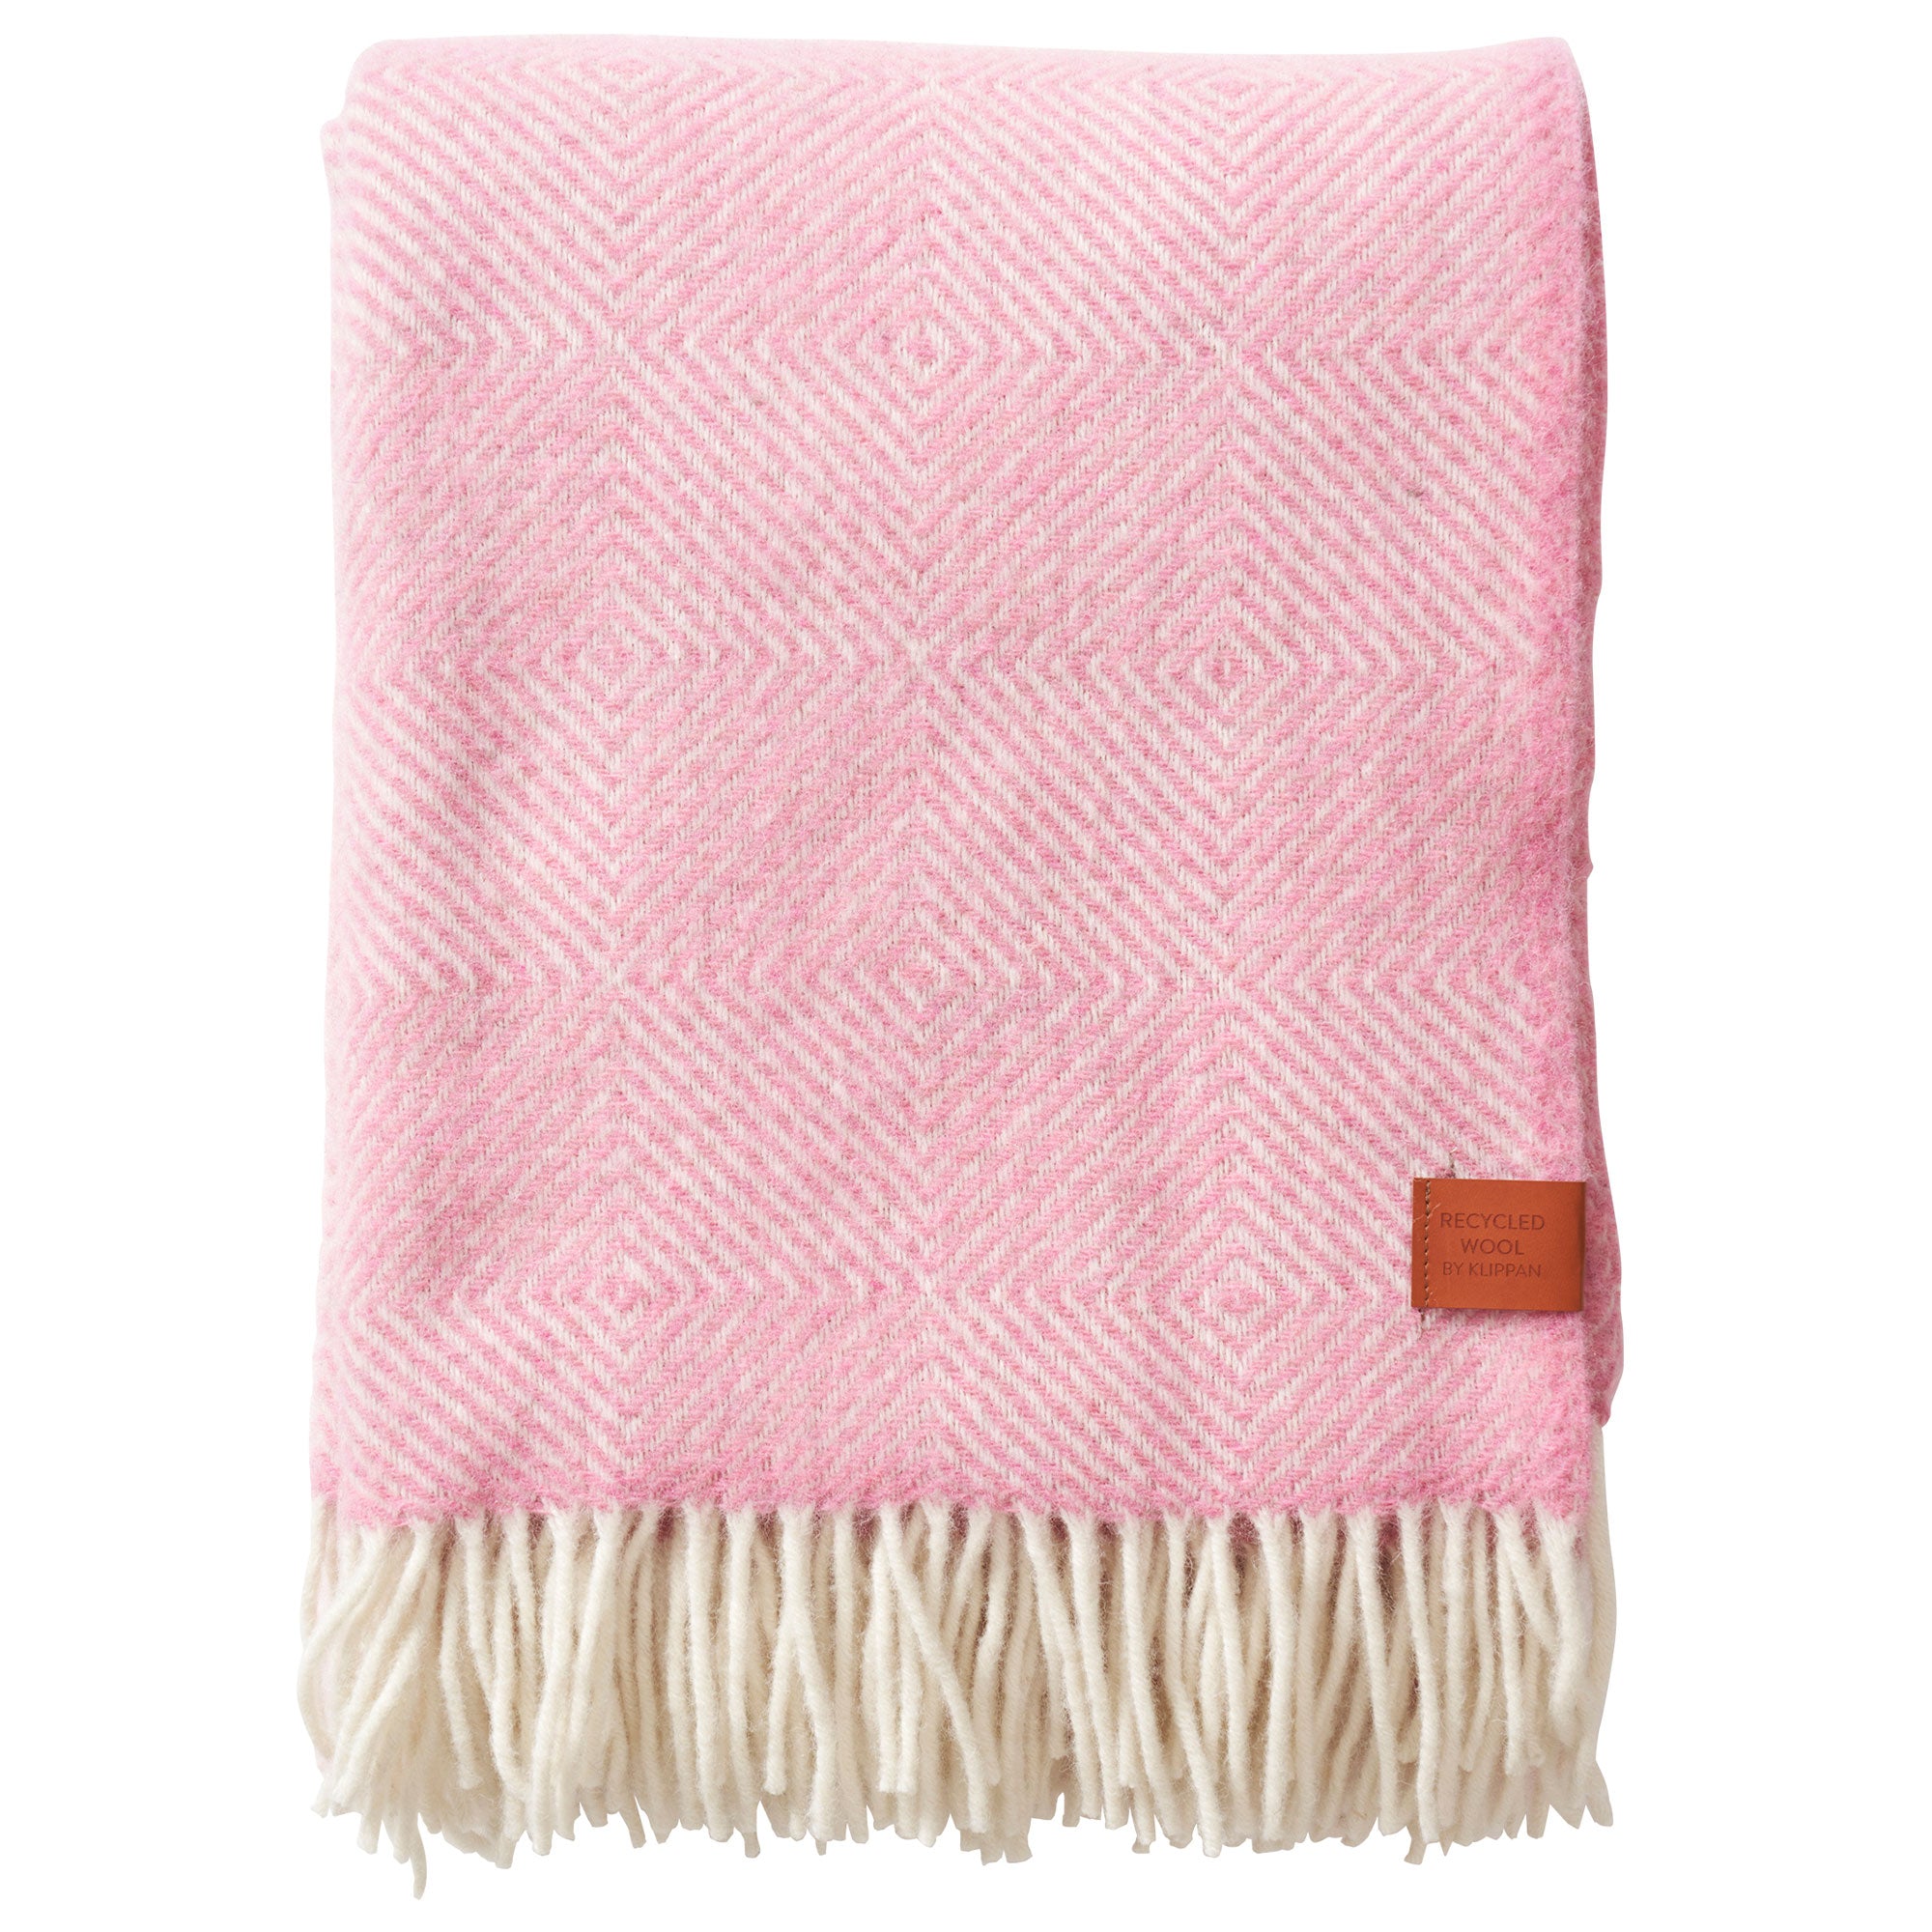 Gooseye Pink 130x200cm Recycled Wool Throw